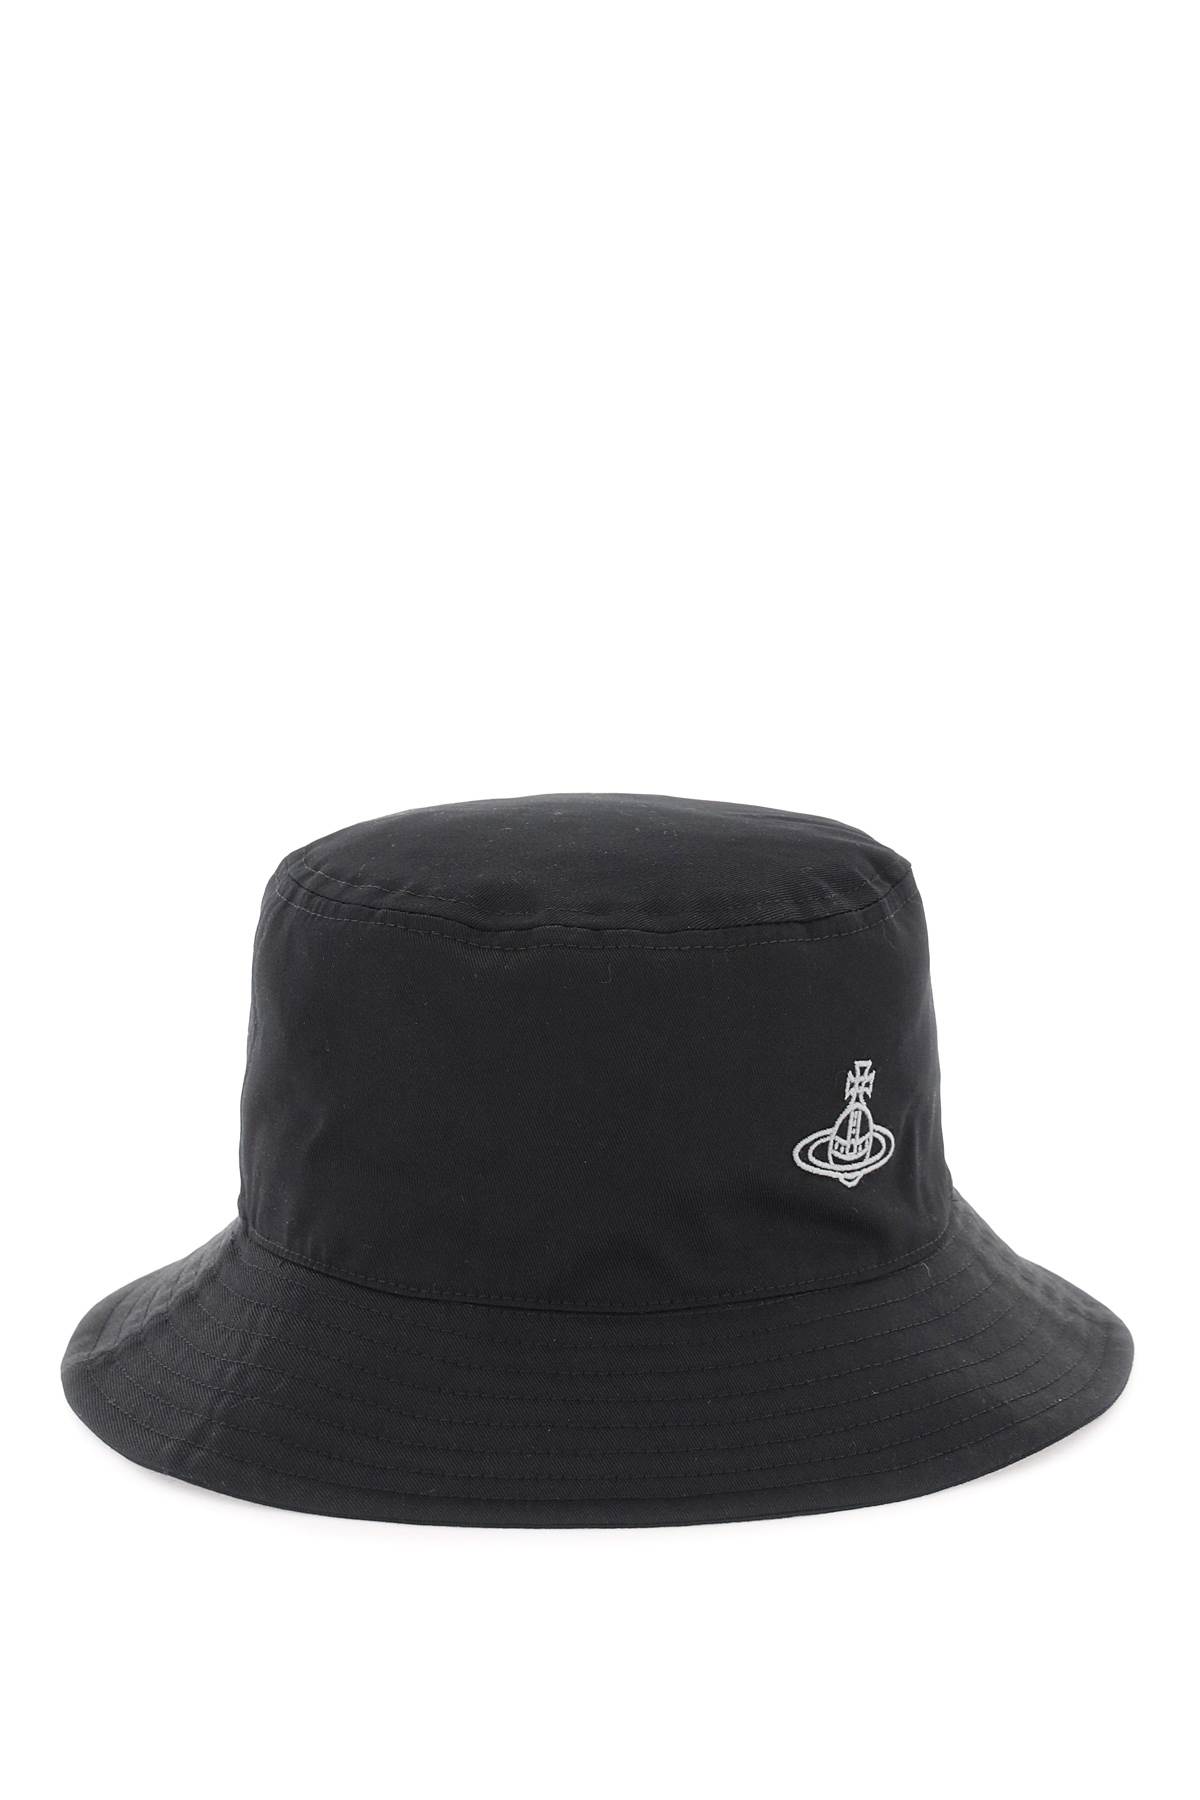 VIVIENNE WESTWOOD BUCKET HAT WITH EMBROIDERY